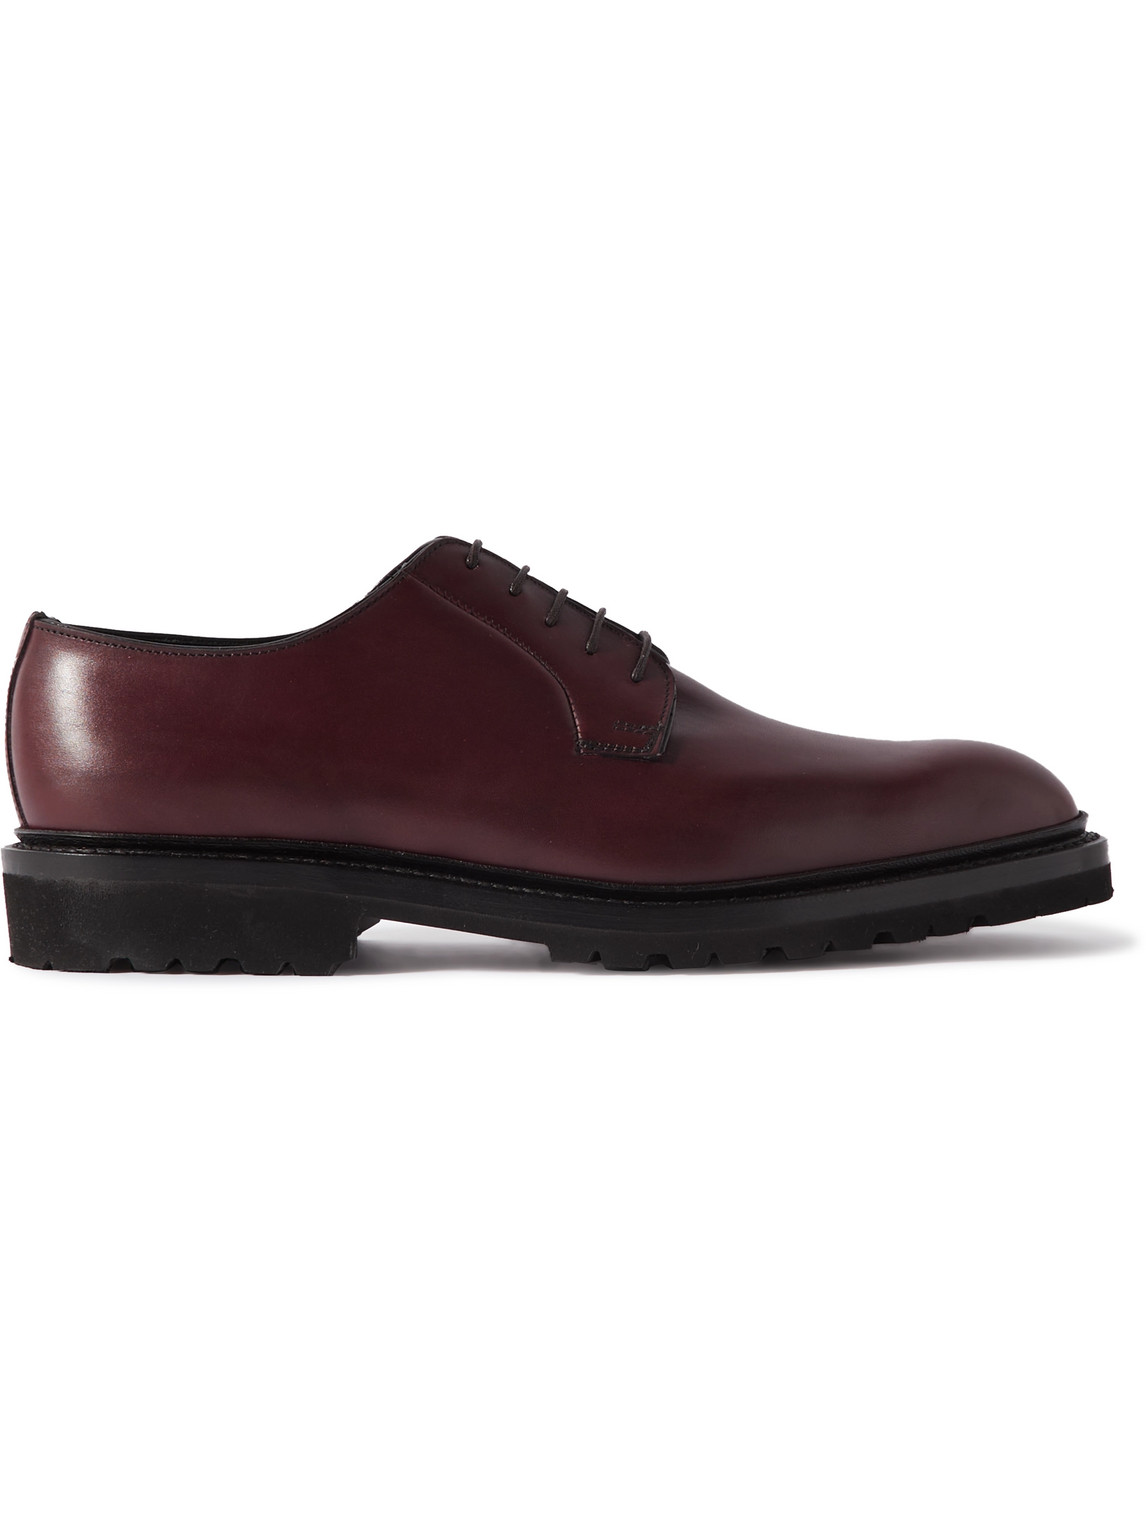 George Cleverley Archie Leather Derby Shoes In Burgundy